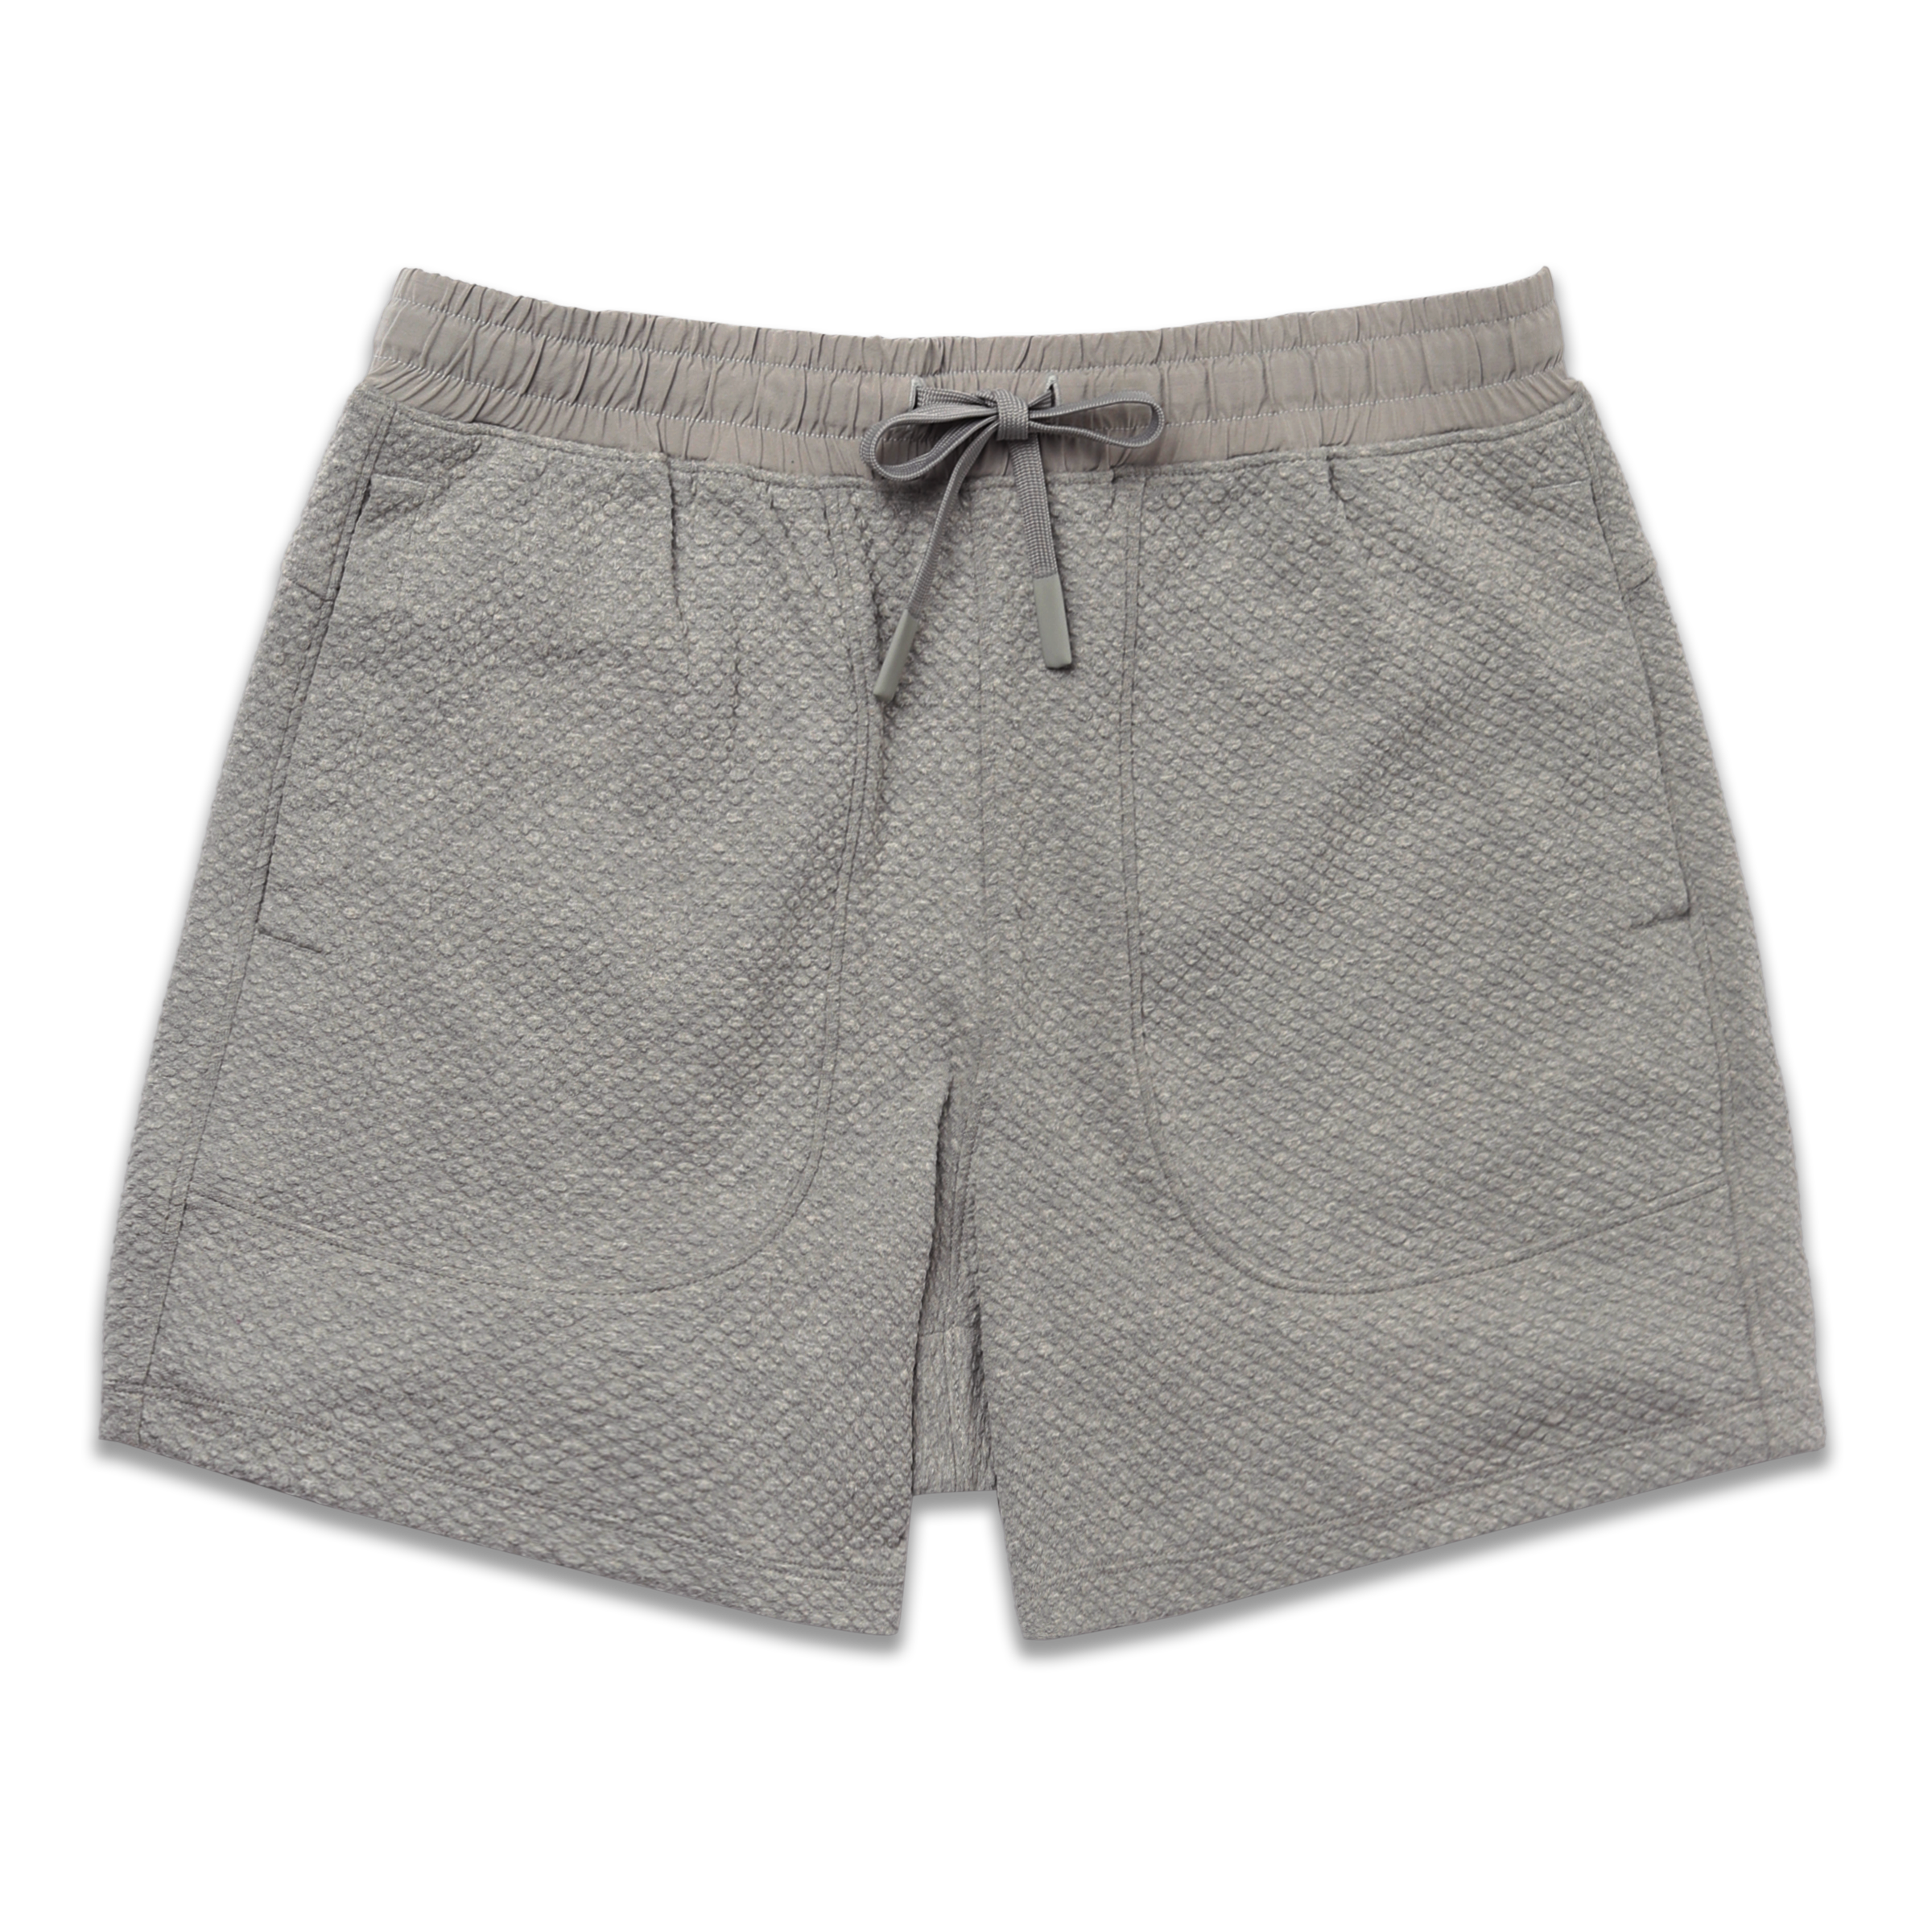 Roam Short 5.5" Heather Grey front with an elastic waistband, two side seam pockets, and dyed to match drawstring